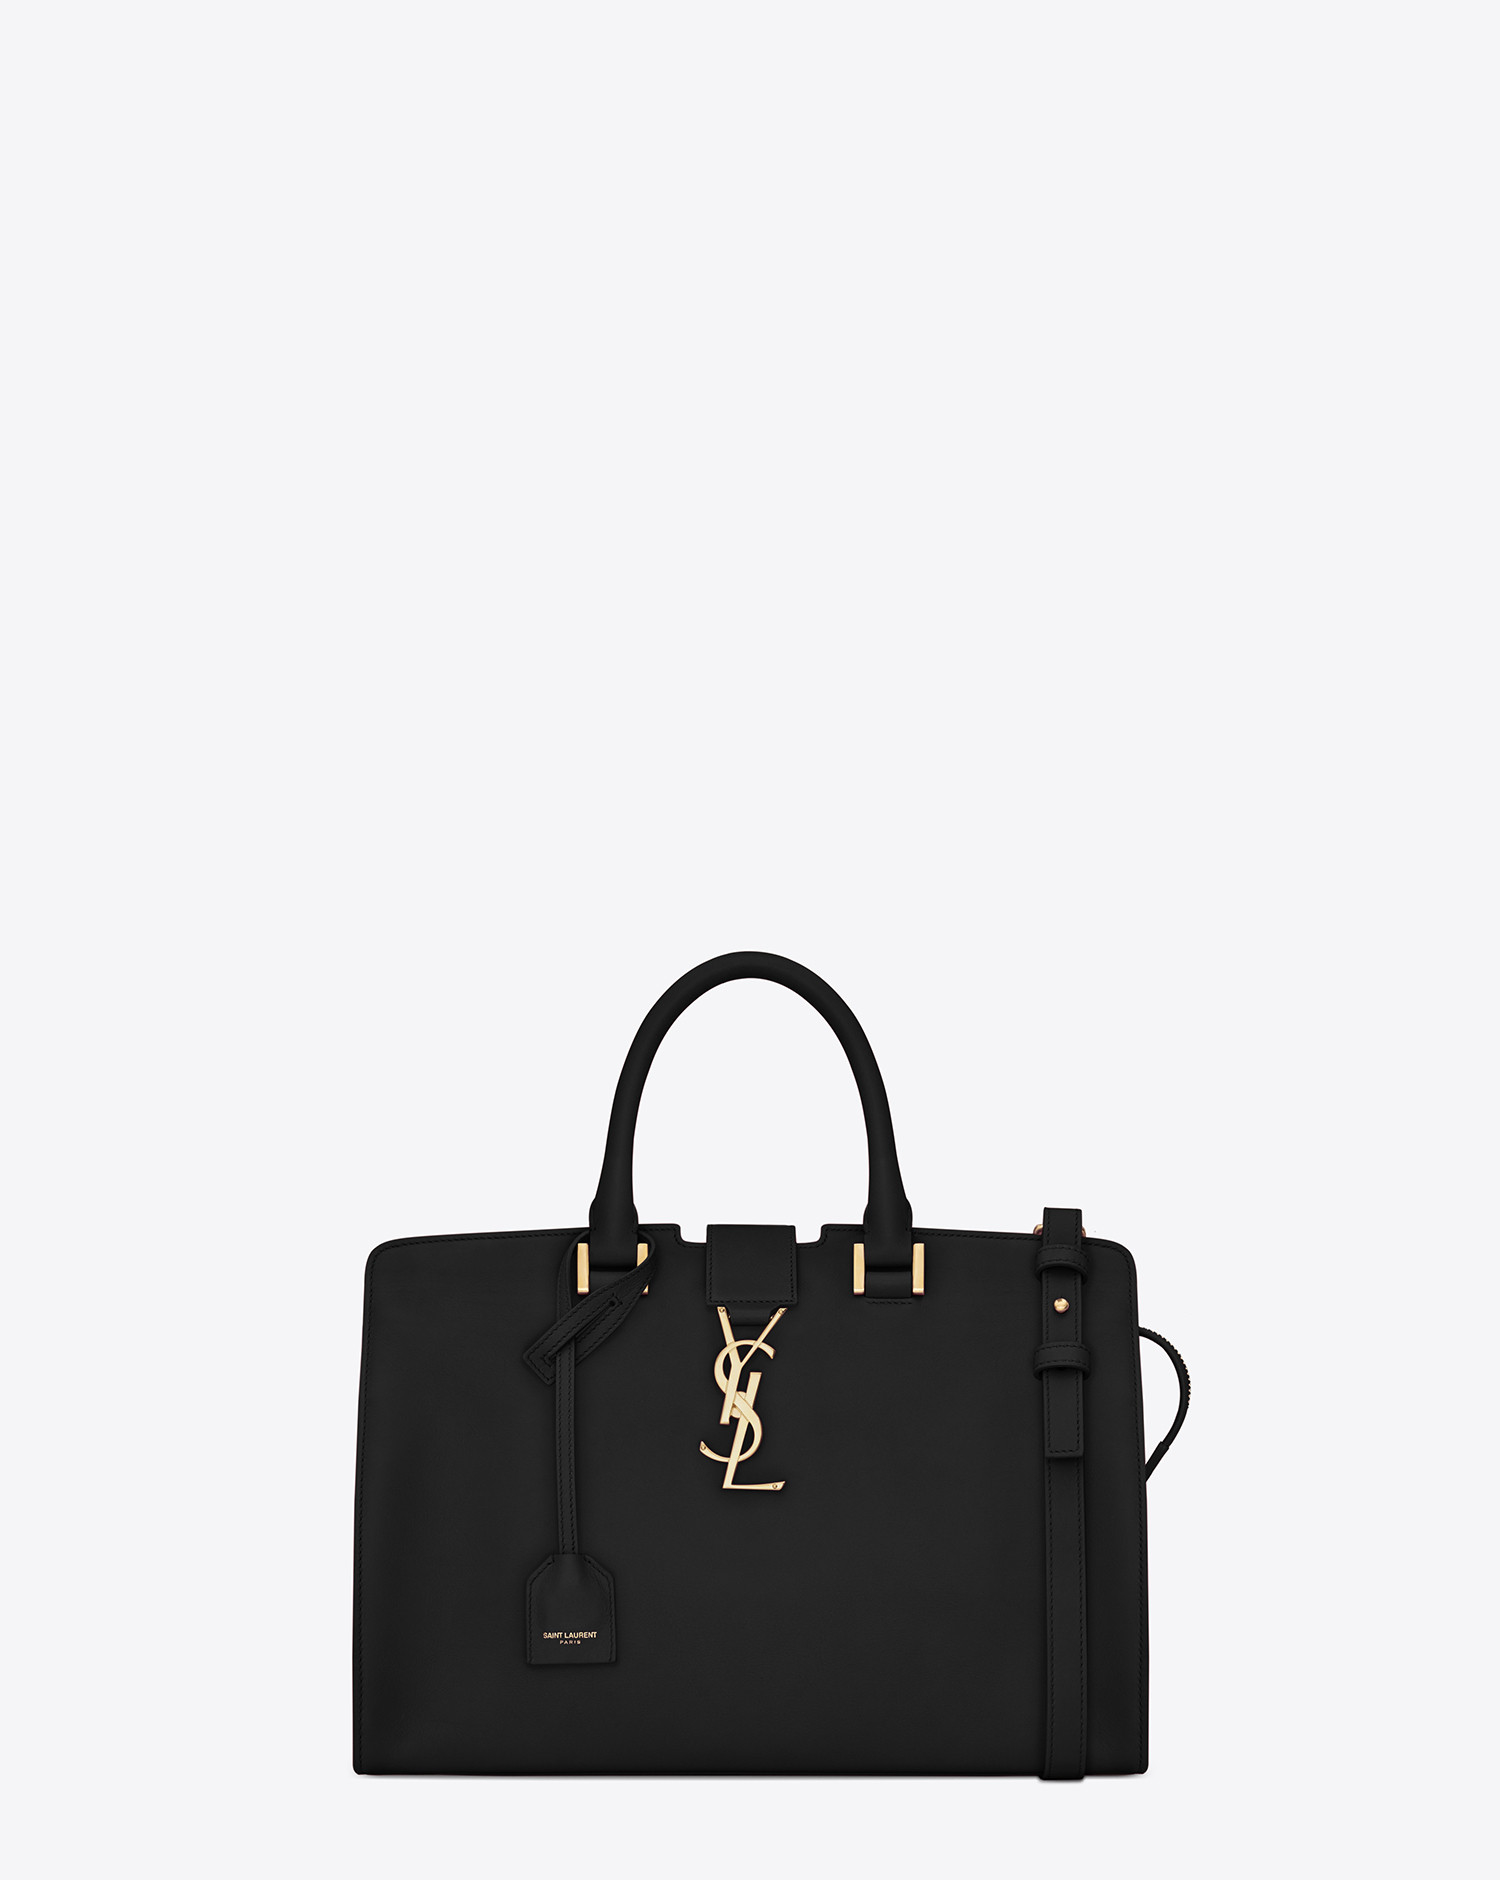 Lyst - Saint Laurent Small Cabas Ysl Bag In Black Leather in Black